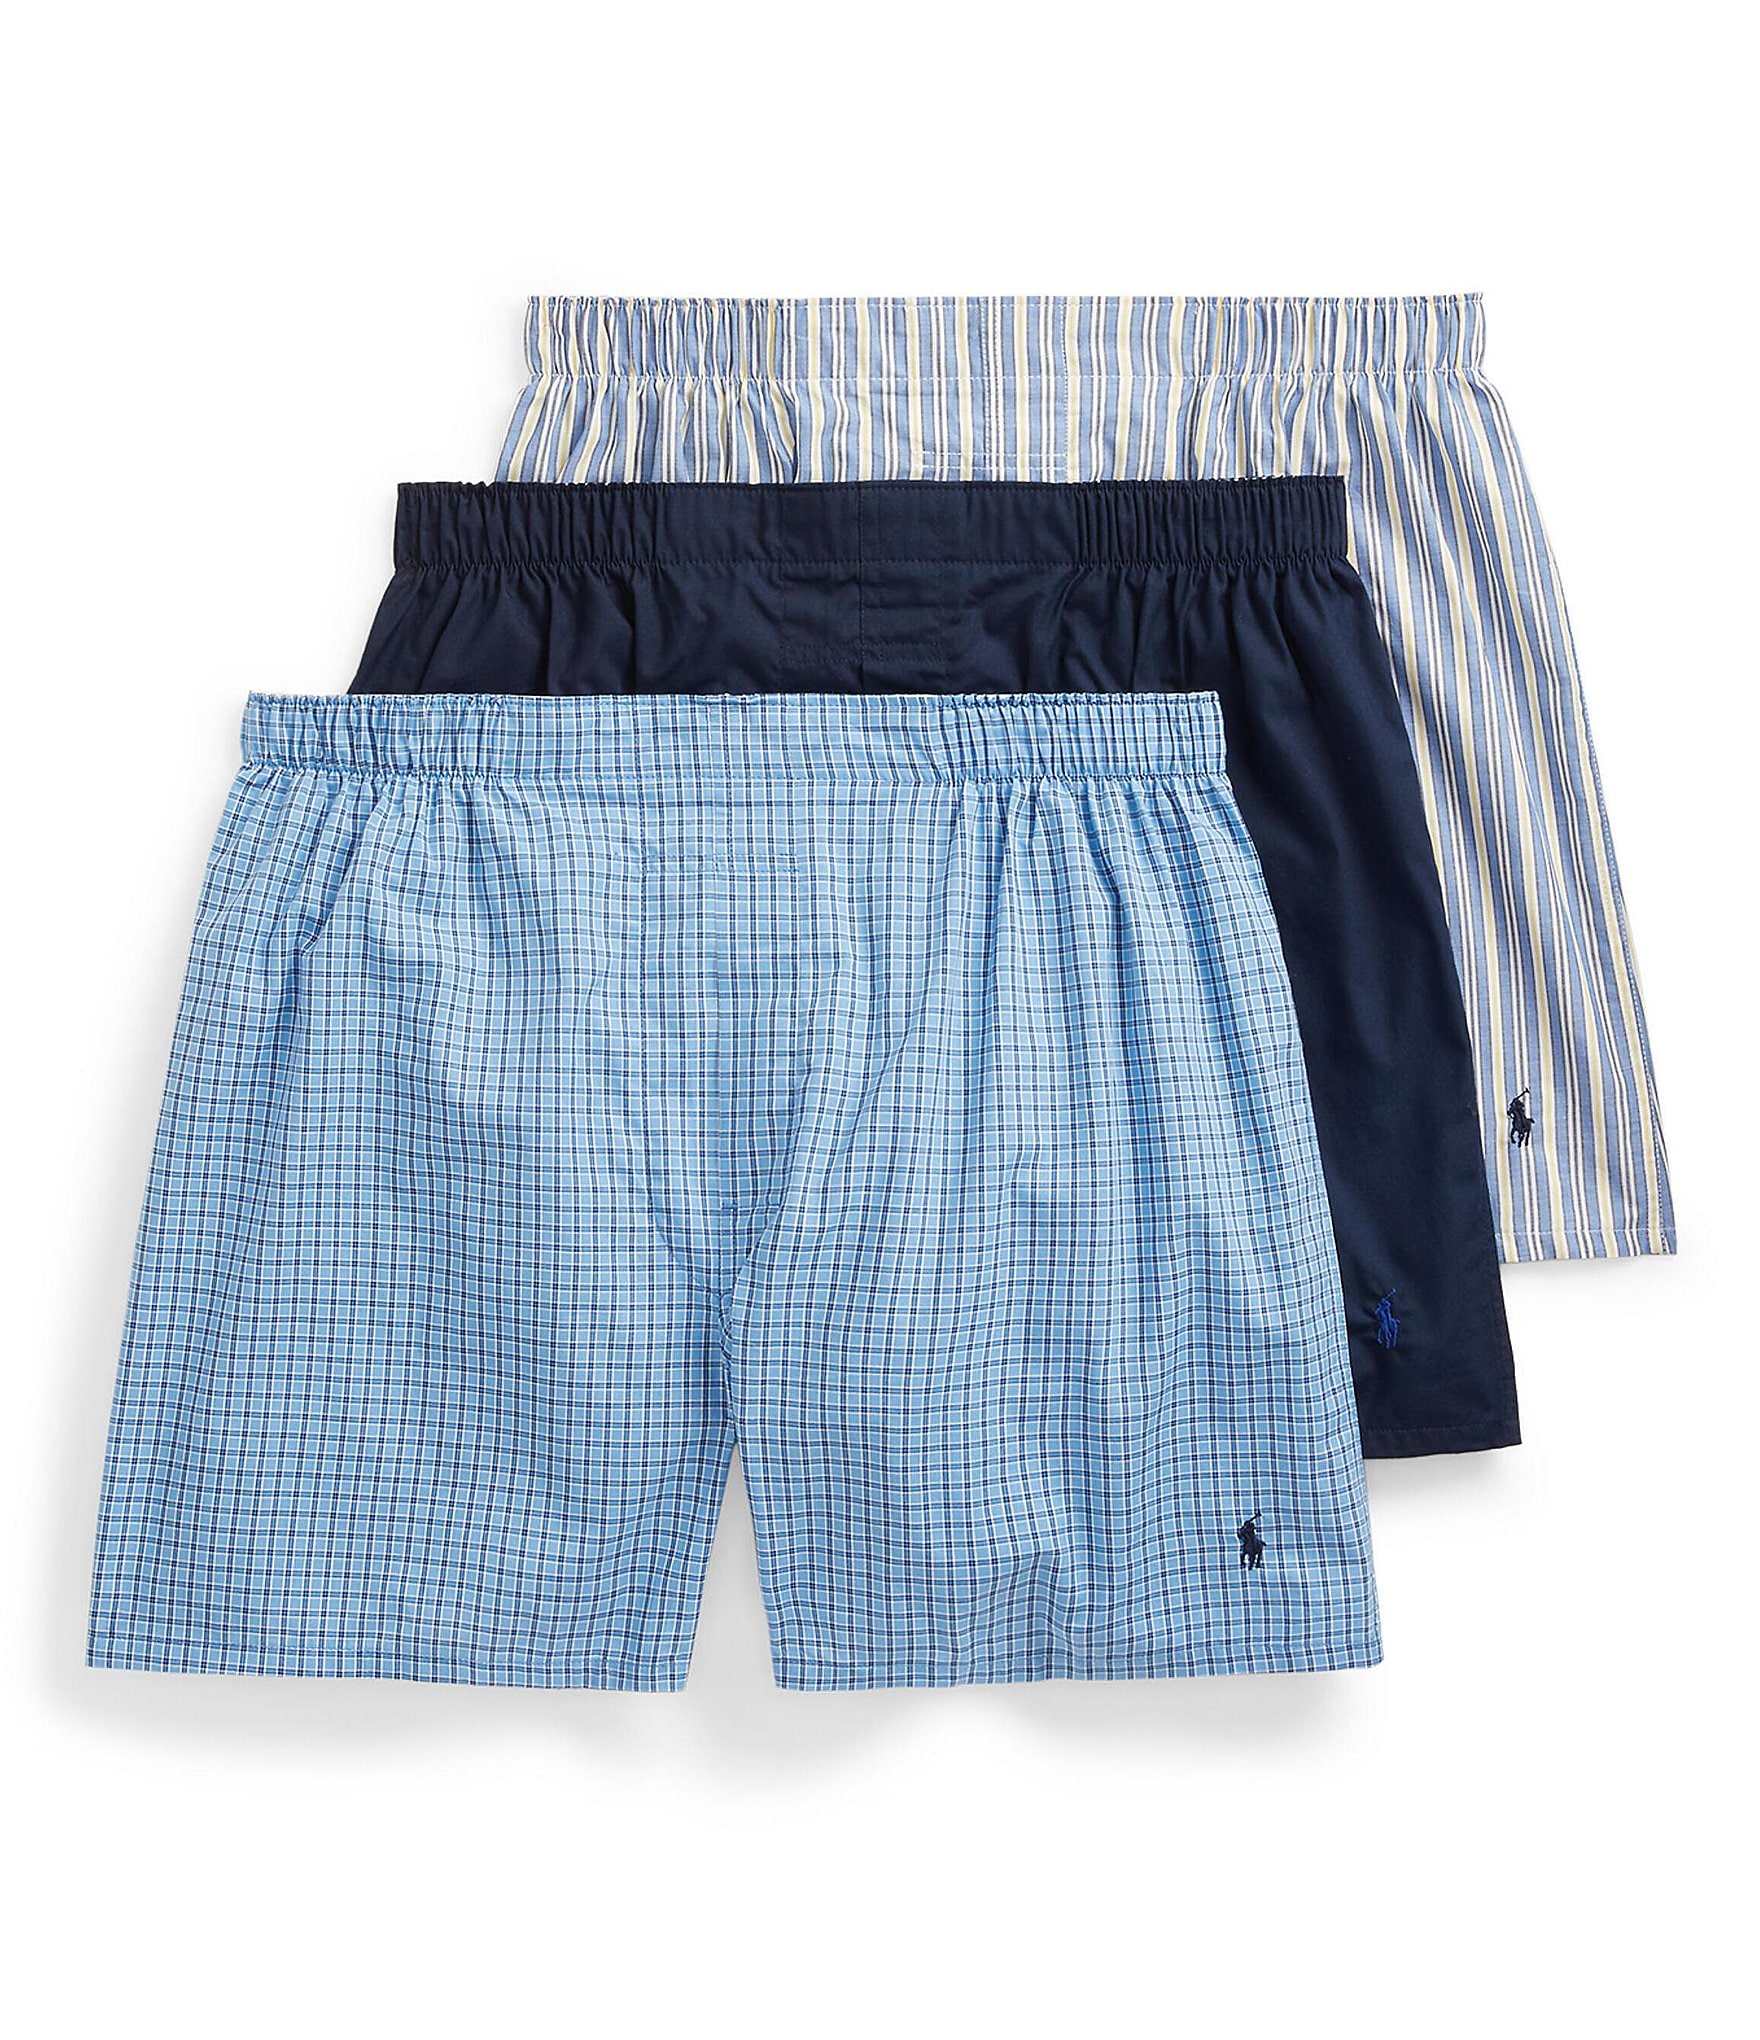 Polo Ralph Lauren Big & Tall Classic-Fit Cotton Woven Boxers 3